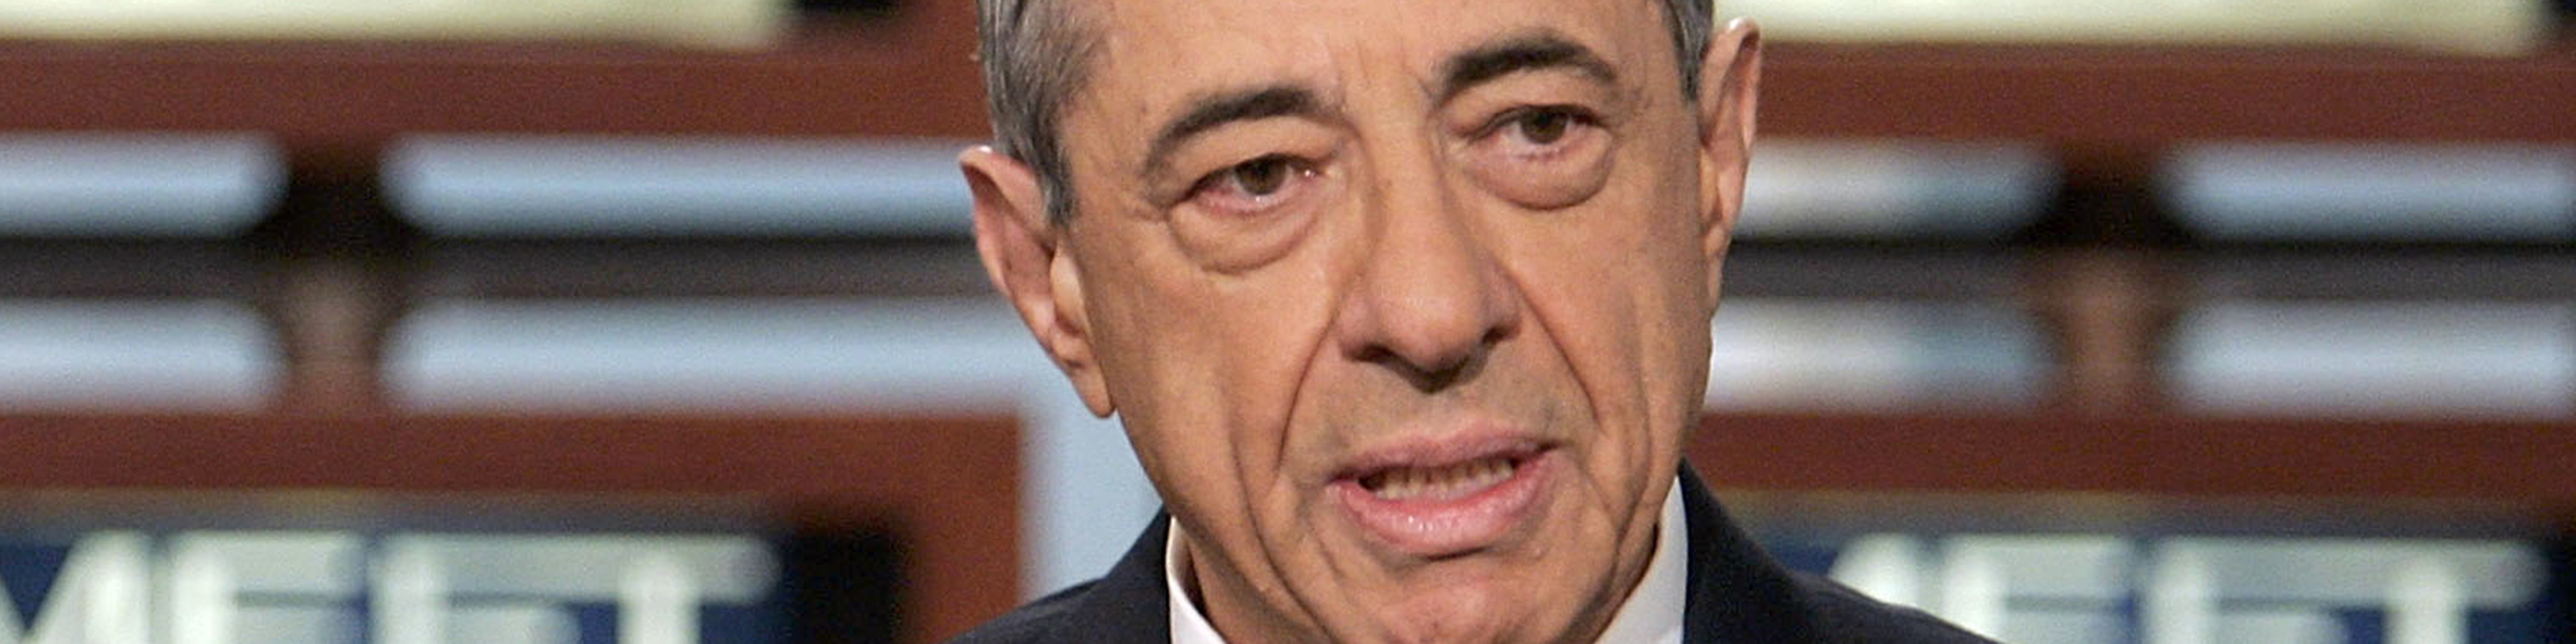 a close up photo of former new york governor mario cuomo on the set of meet the press